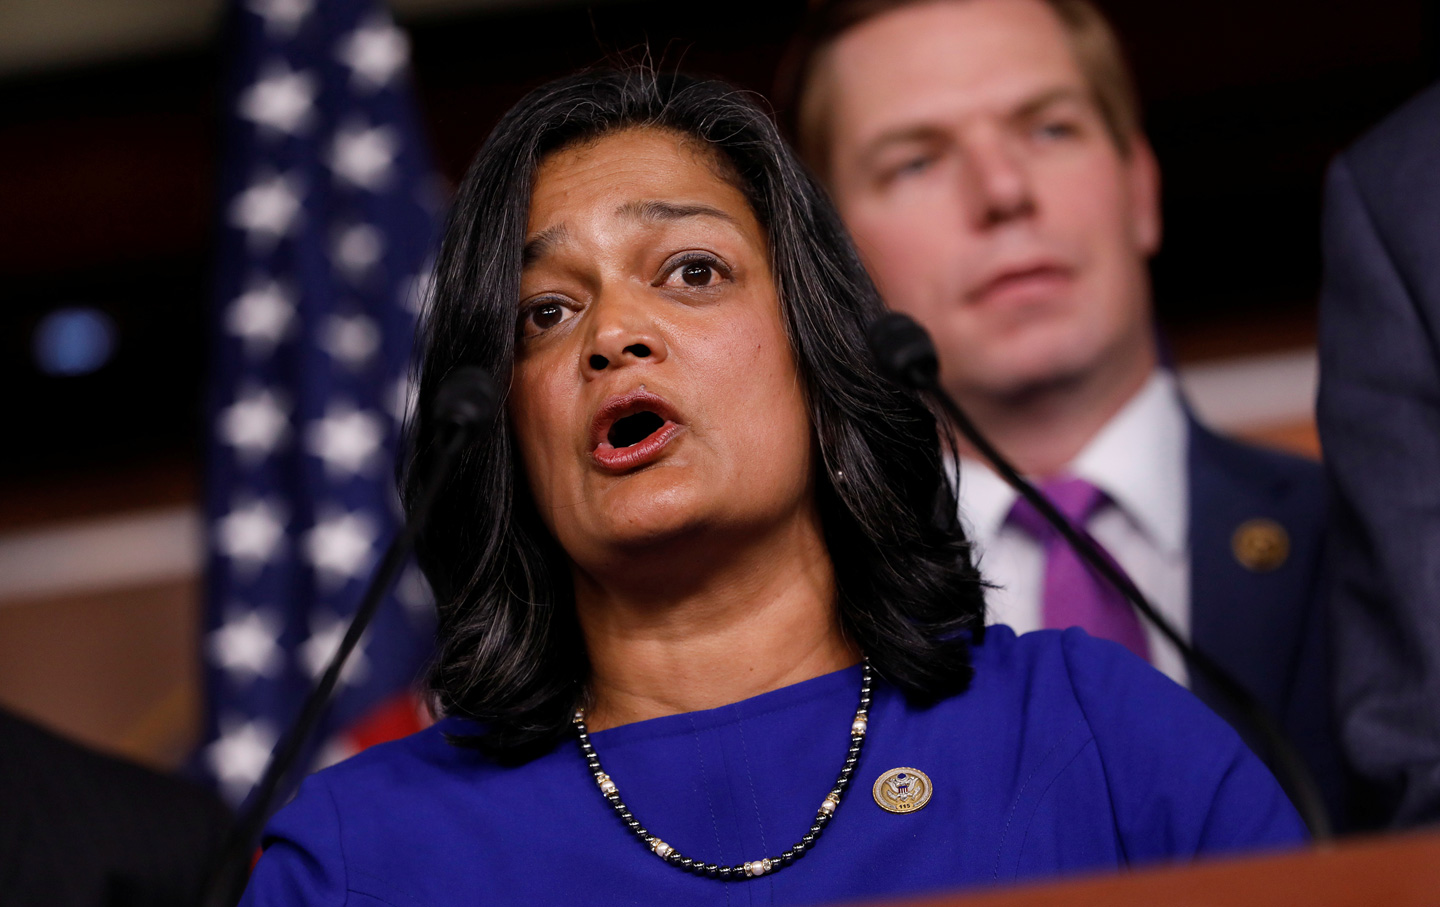 Rep. Pramila Jayapal—‘They Could Hear Their Children Screaming for Them in the Next Room’